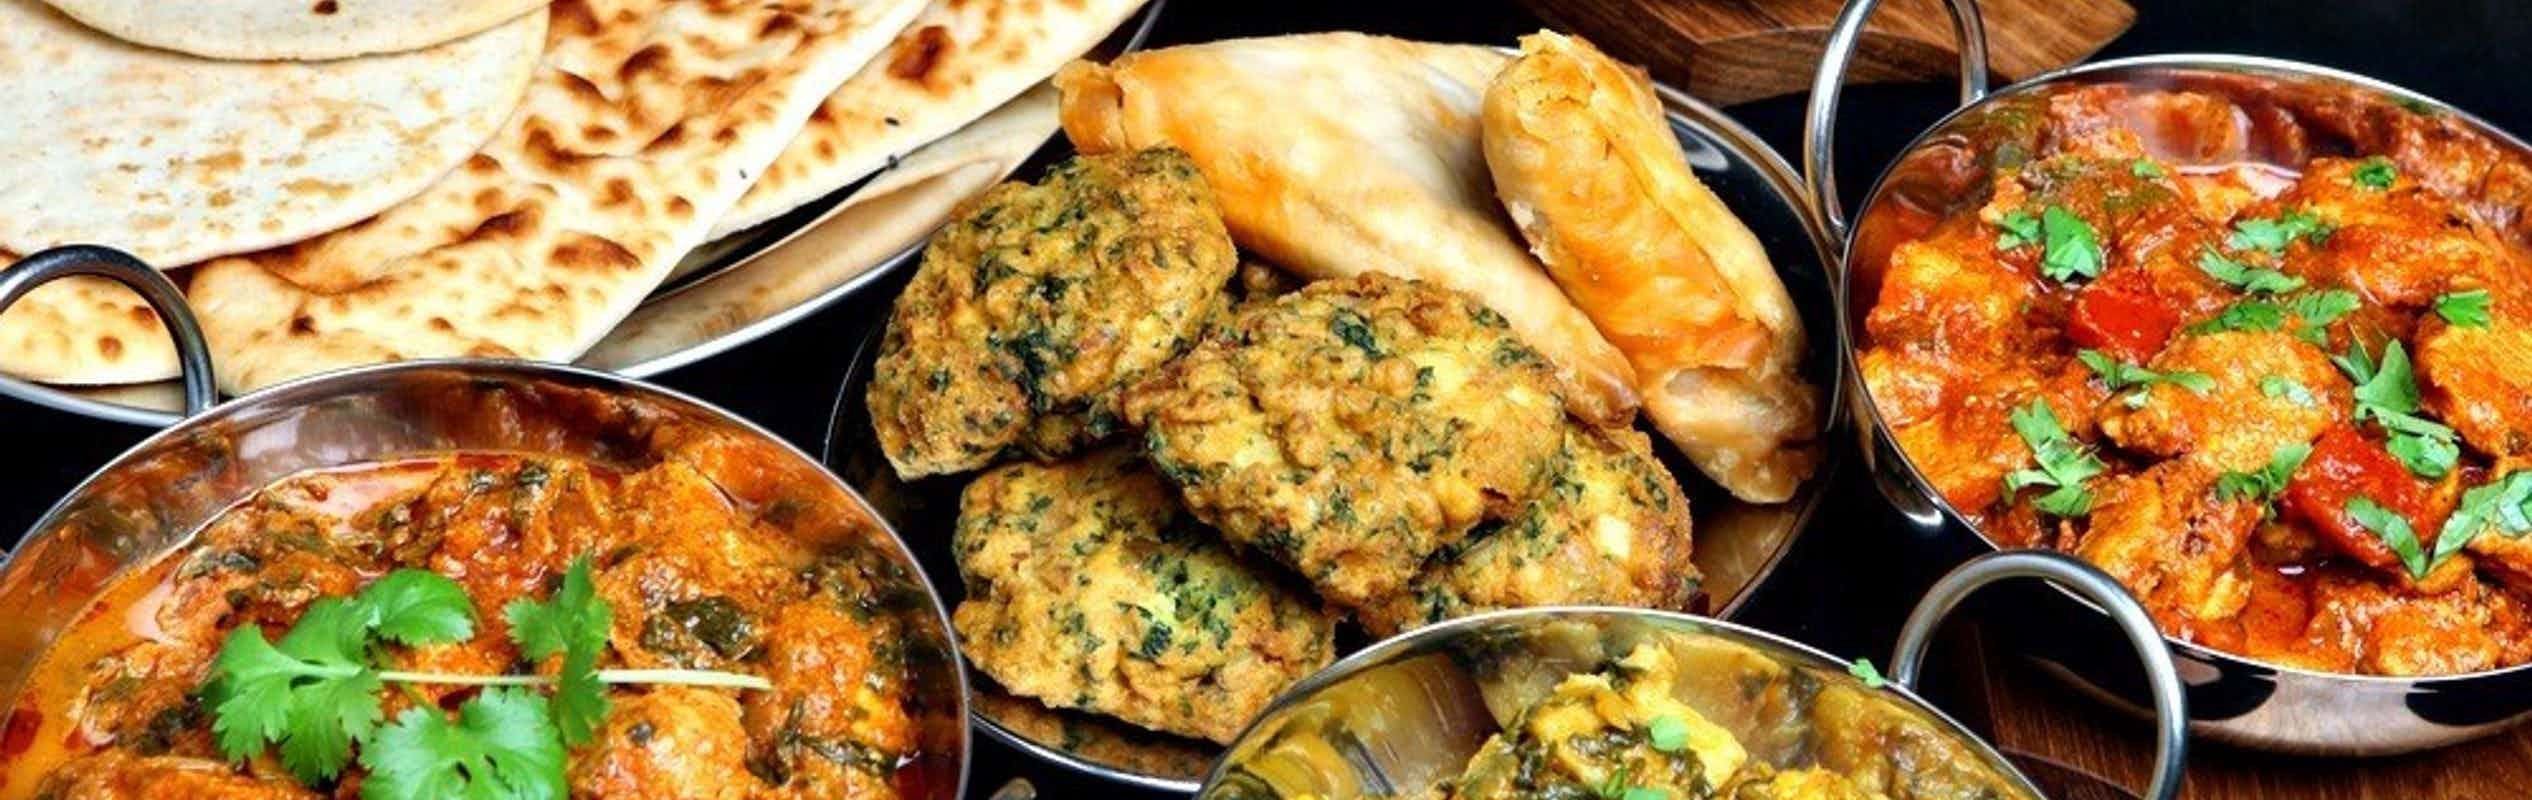 Enjoy Indian, Seafood and Vegetarian cuisine at Delhi Kitchen Indian Cuisine in Redwood, Christchurch